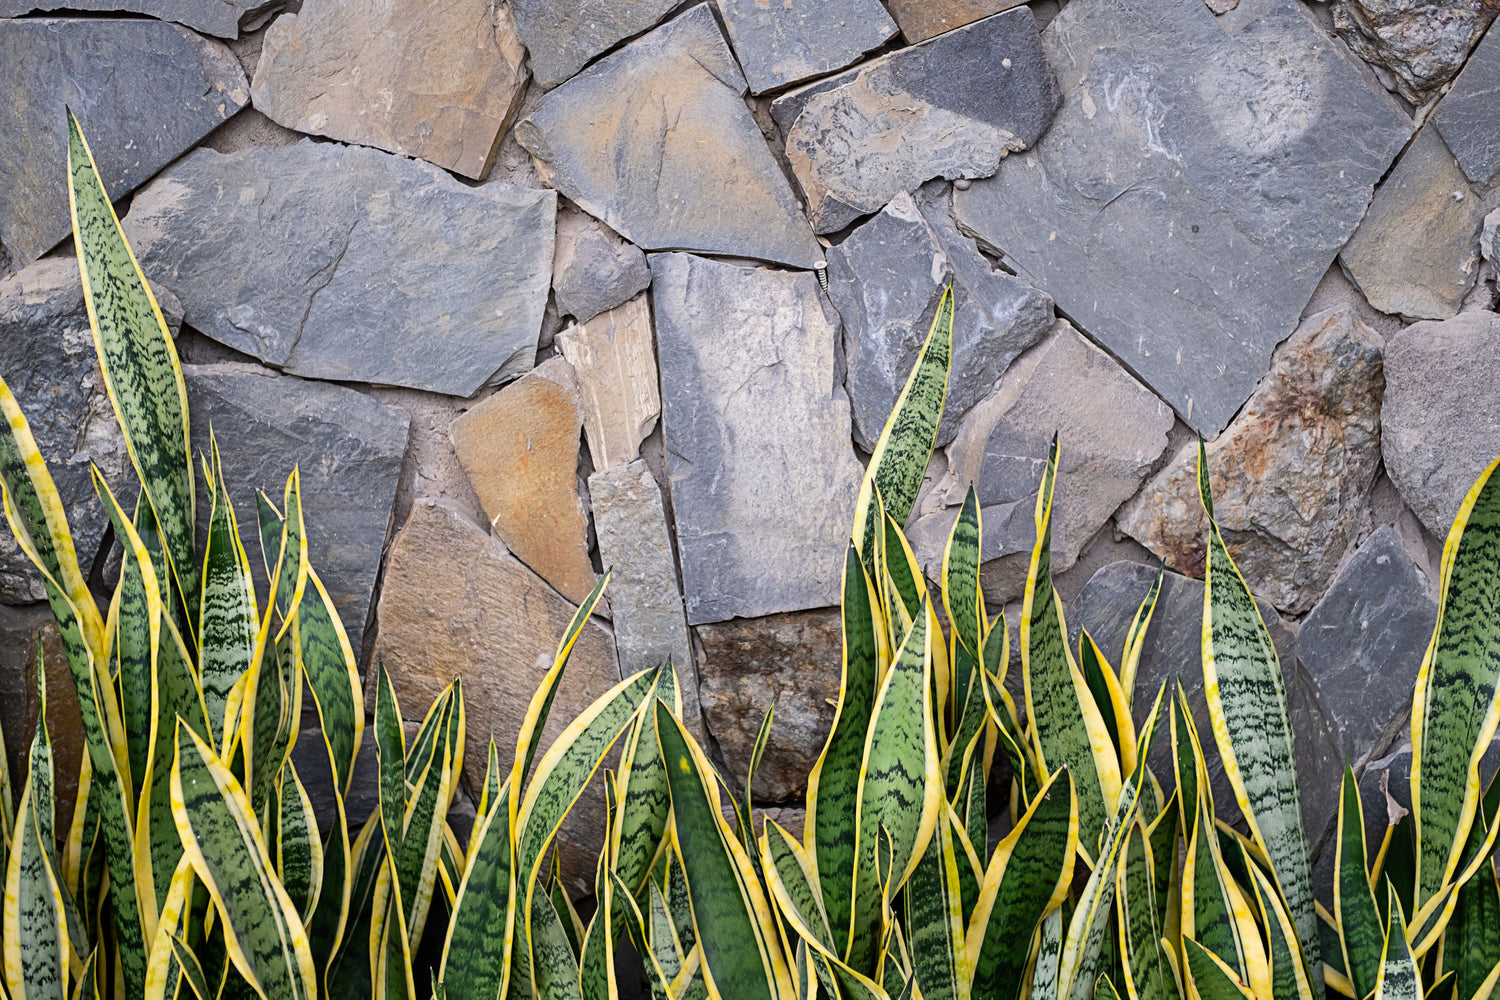 Dracaena trifasciata 'Laurentii' snake plant with vivid yellow stripes grown upward in front of a stone paver wall.